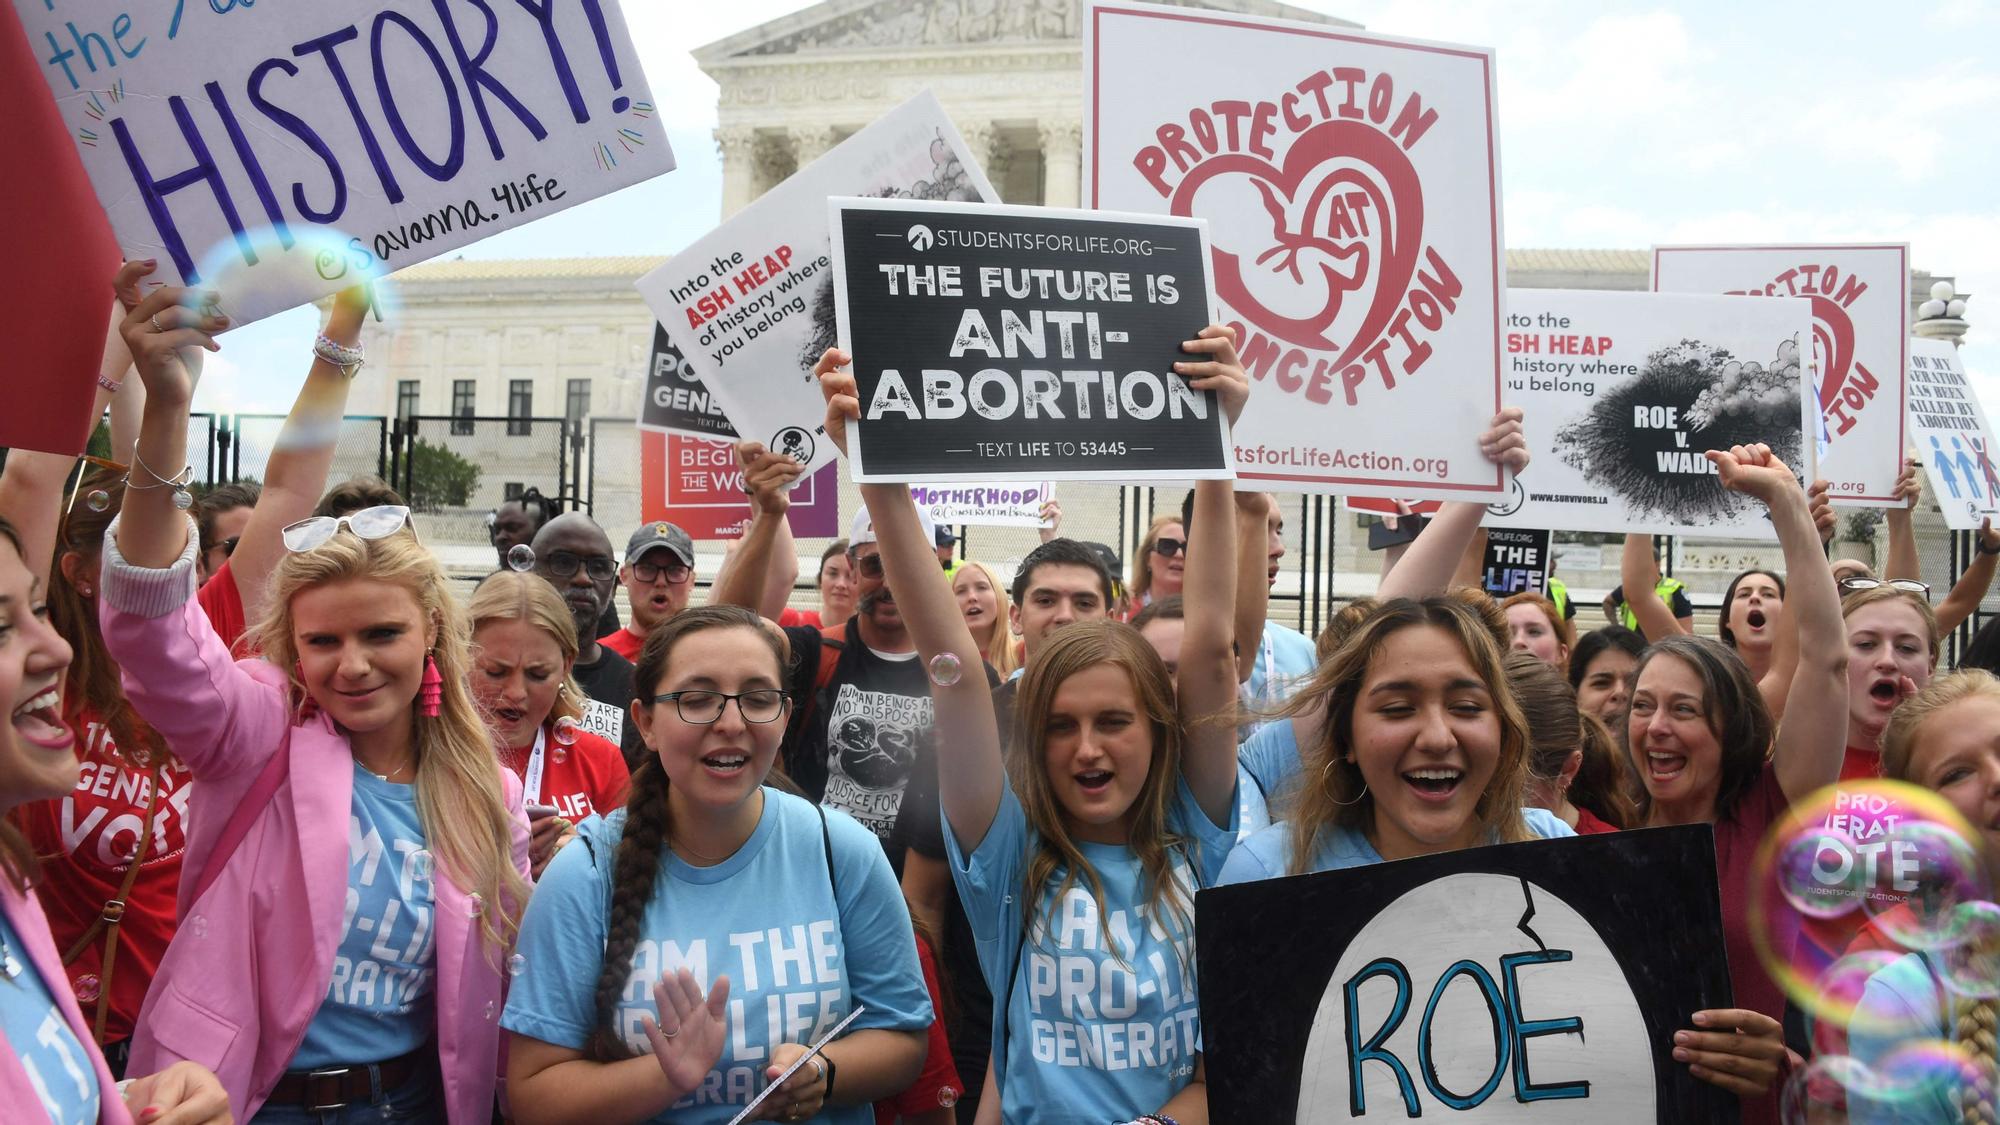 Anti-abortion campaigners celebrate outside the US Supreme Court in Washington, DC, on June 24, 2022. - The US Supreme Court on Friday ended the right to abortion in a seismic ruling that shreds half a century of constitutional protections on one of the most divisive and bitterly fought issues in American political life. The conservative-dominated court overturned the landmark 1973 &quot;Roe v Wade&quot; decision that enshrined a woman's right to an abortion and said individual states can permit or restrict the procedure themselves. (Photo by OLIVIER DOULIERY / AFP)